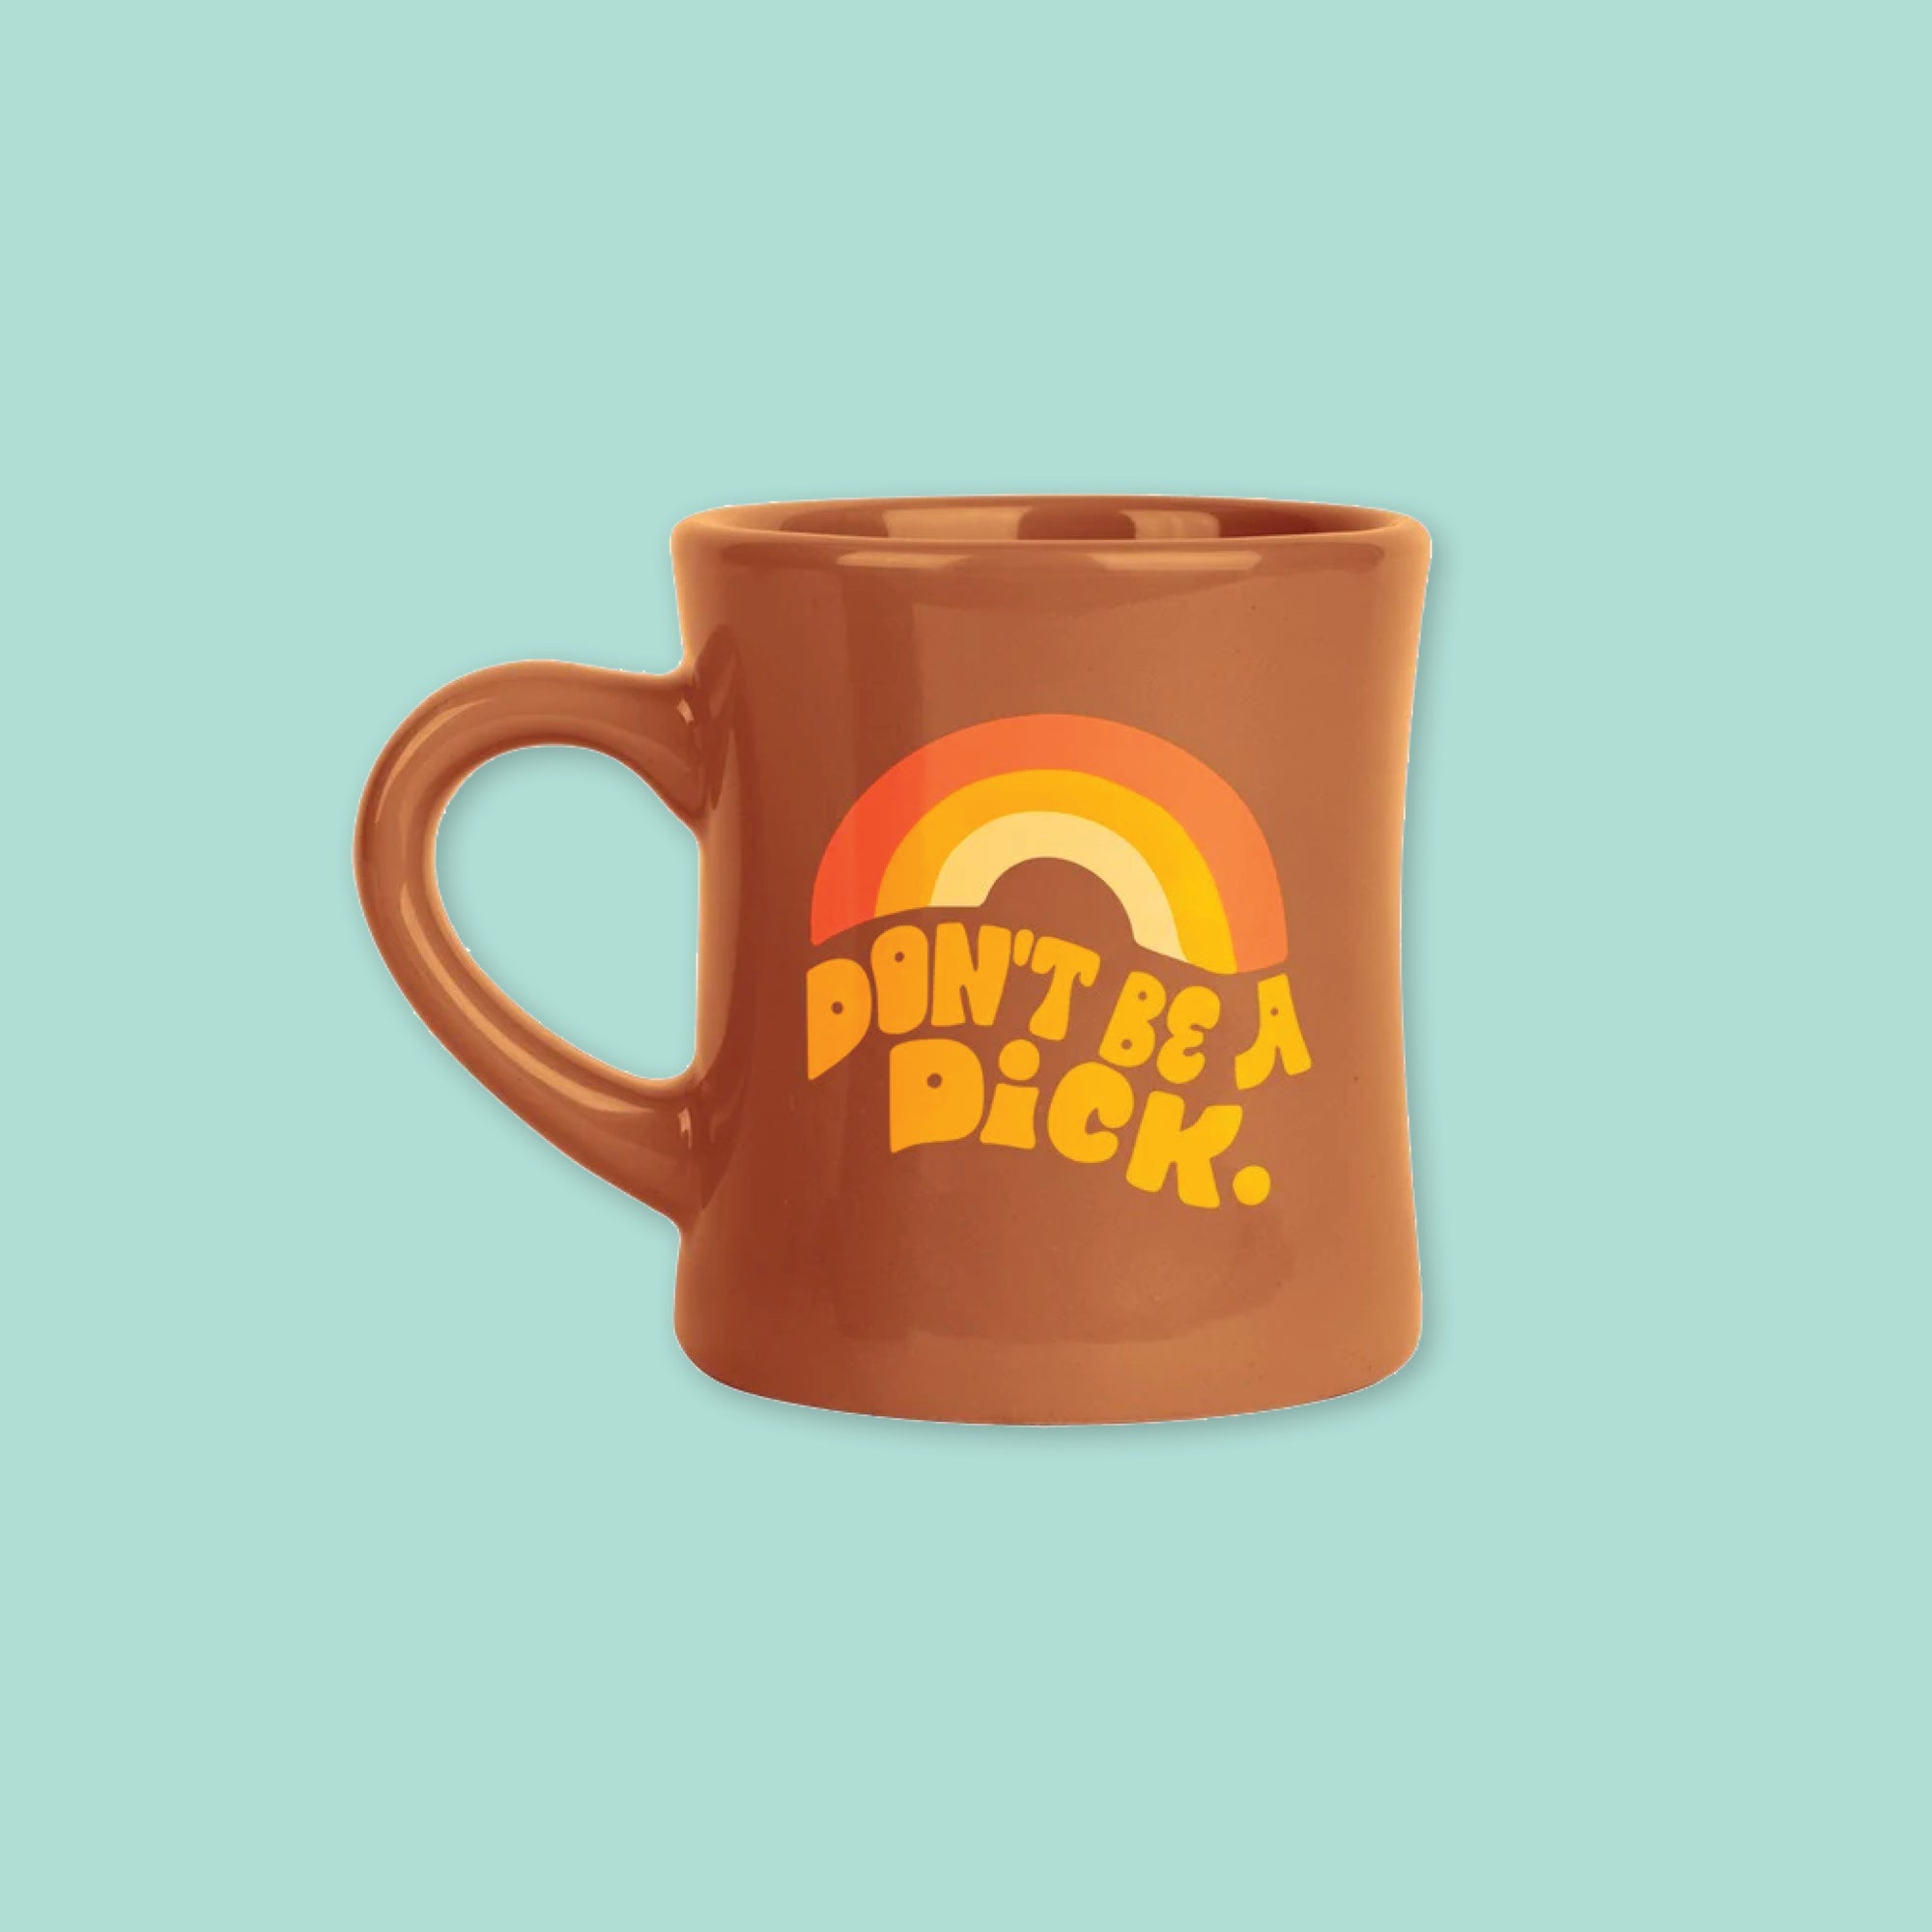 On a cool aqua background is a brown diner style mug with orange, groovy style font that says "Don't Be A Dick." with an orange, light orange and yellow rainbow above it.